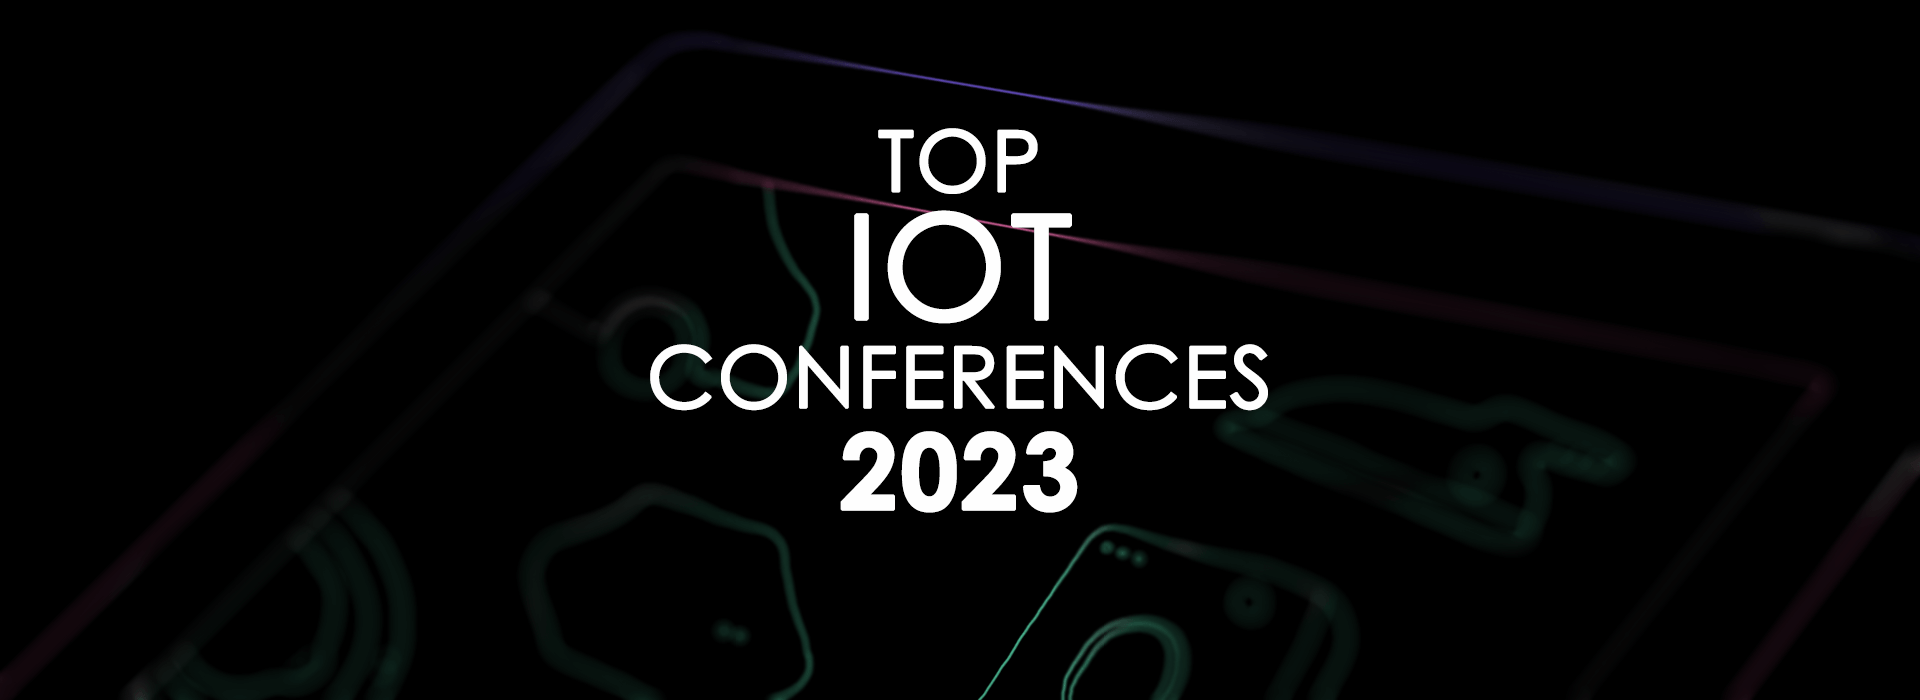 22 Best IoT Conferences and Events to Attend in 2023